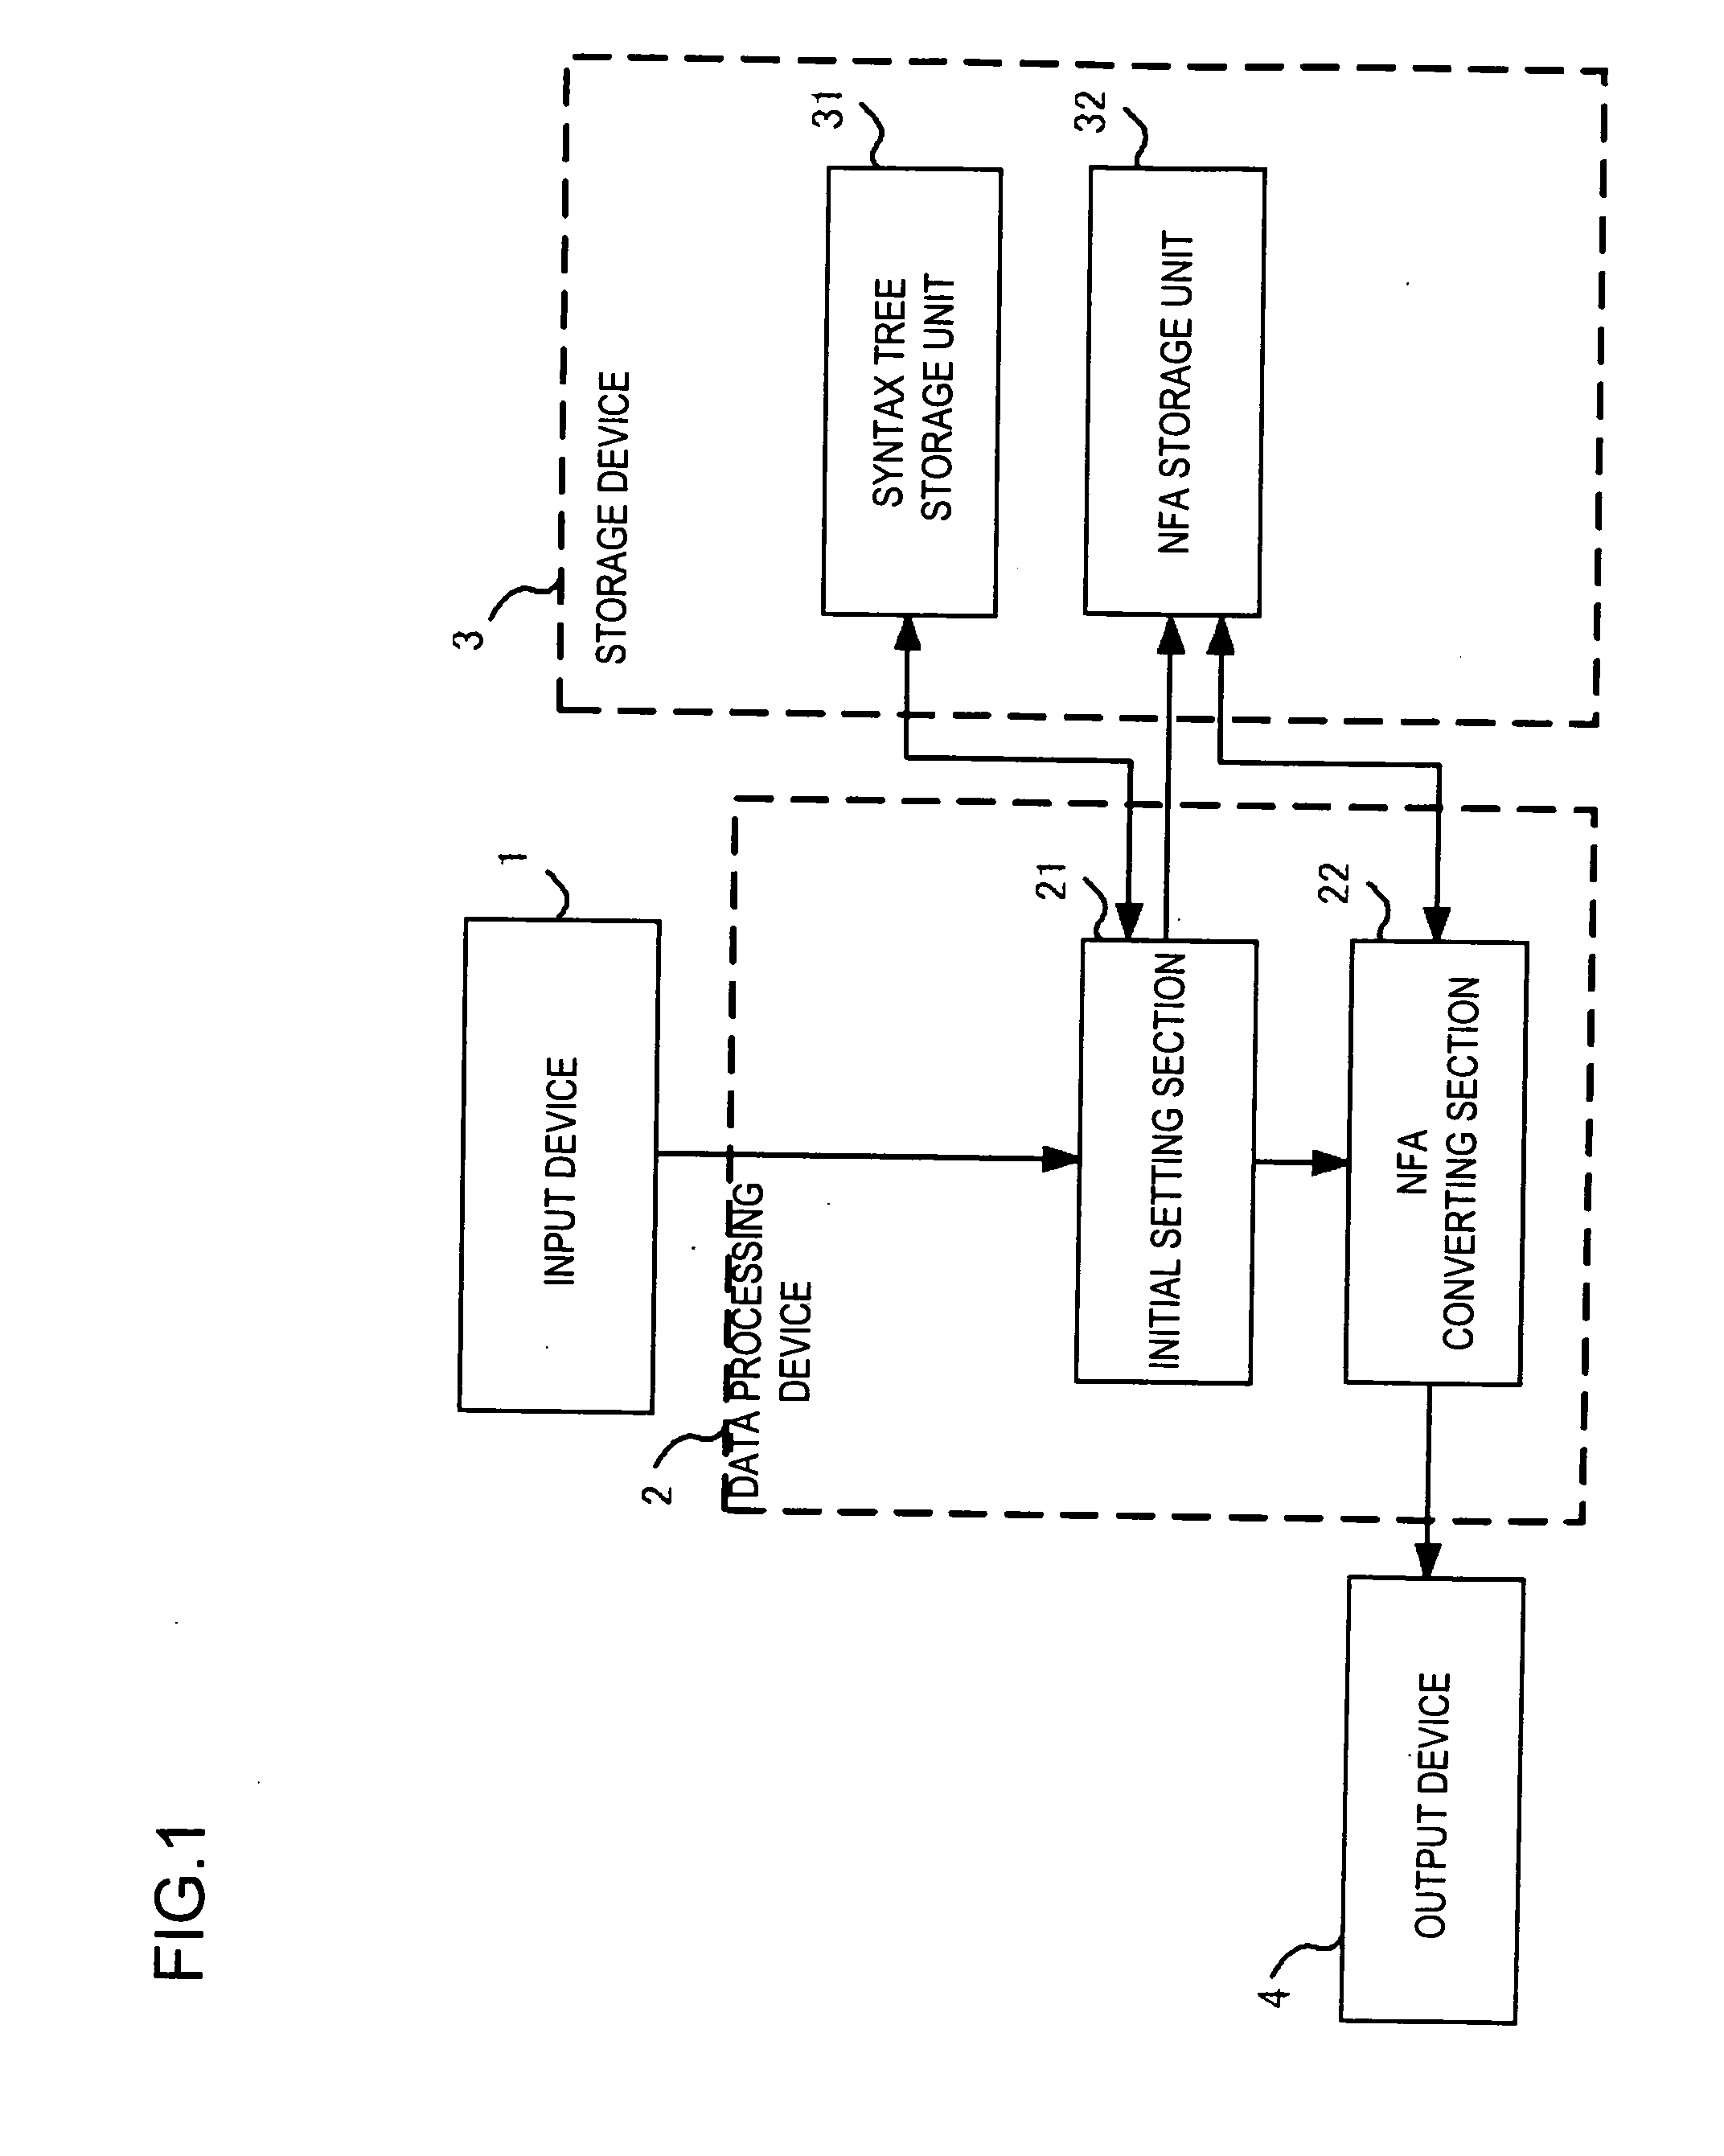 SYSTEM, METHOD, AND PROGRAM FOR GENERATING NON-DETERMINISTIC FINITE AUTOMATON NOT INCLUDING e-TRANSITION